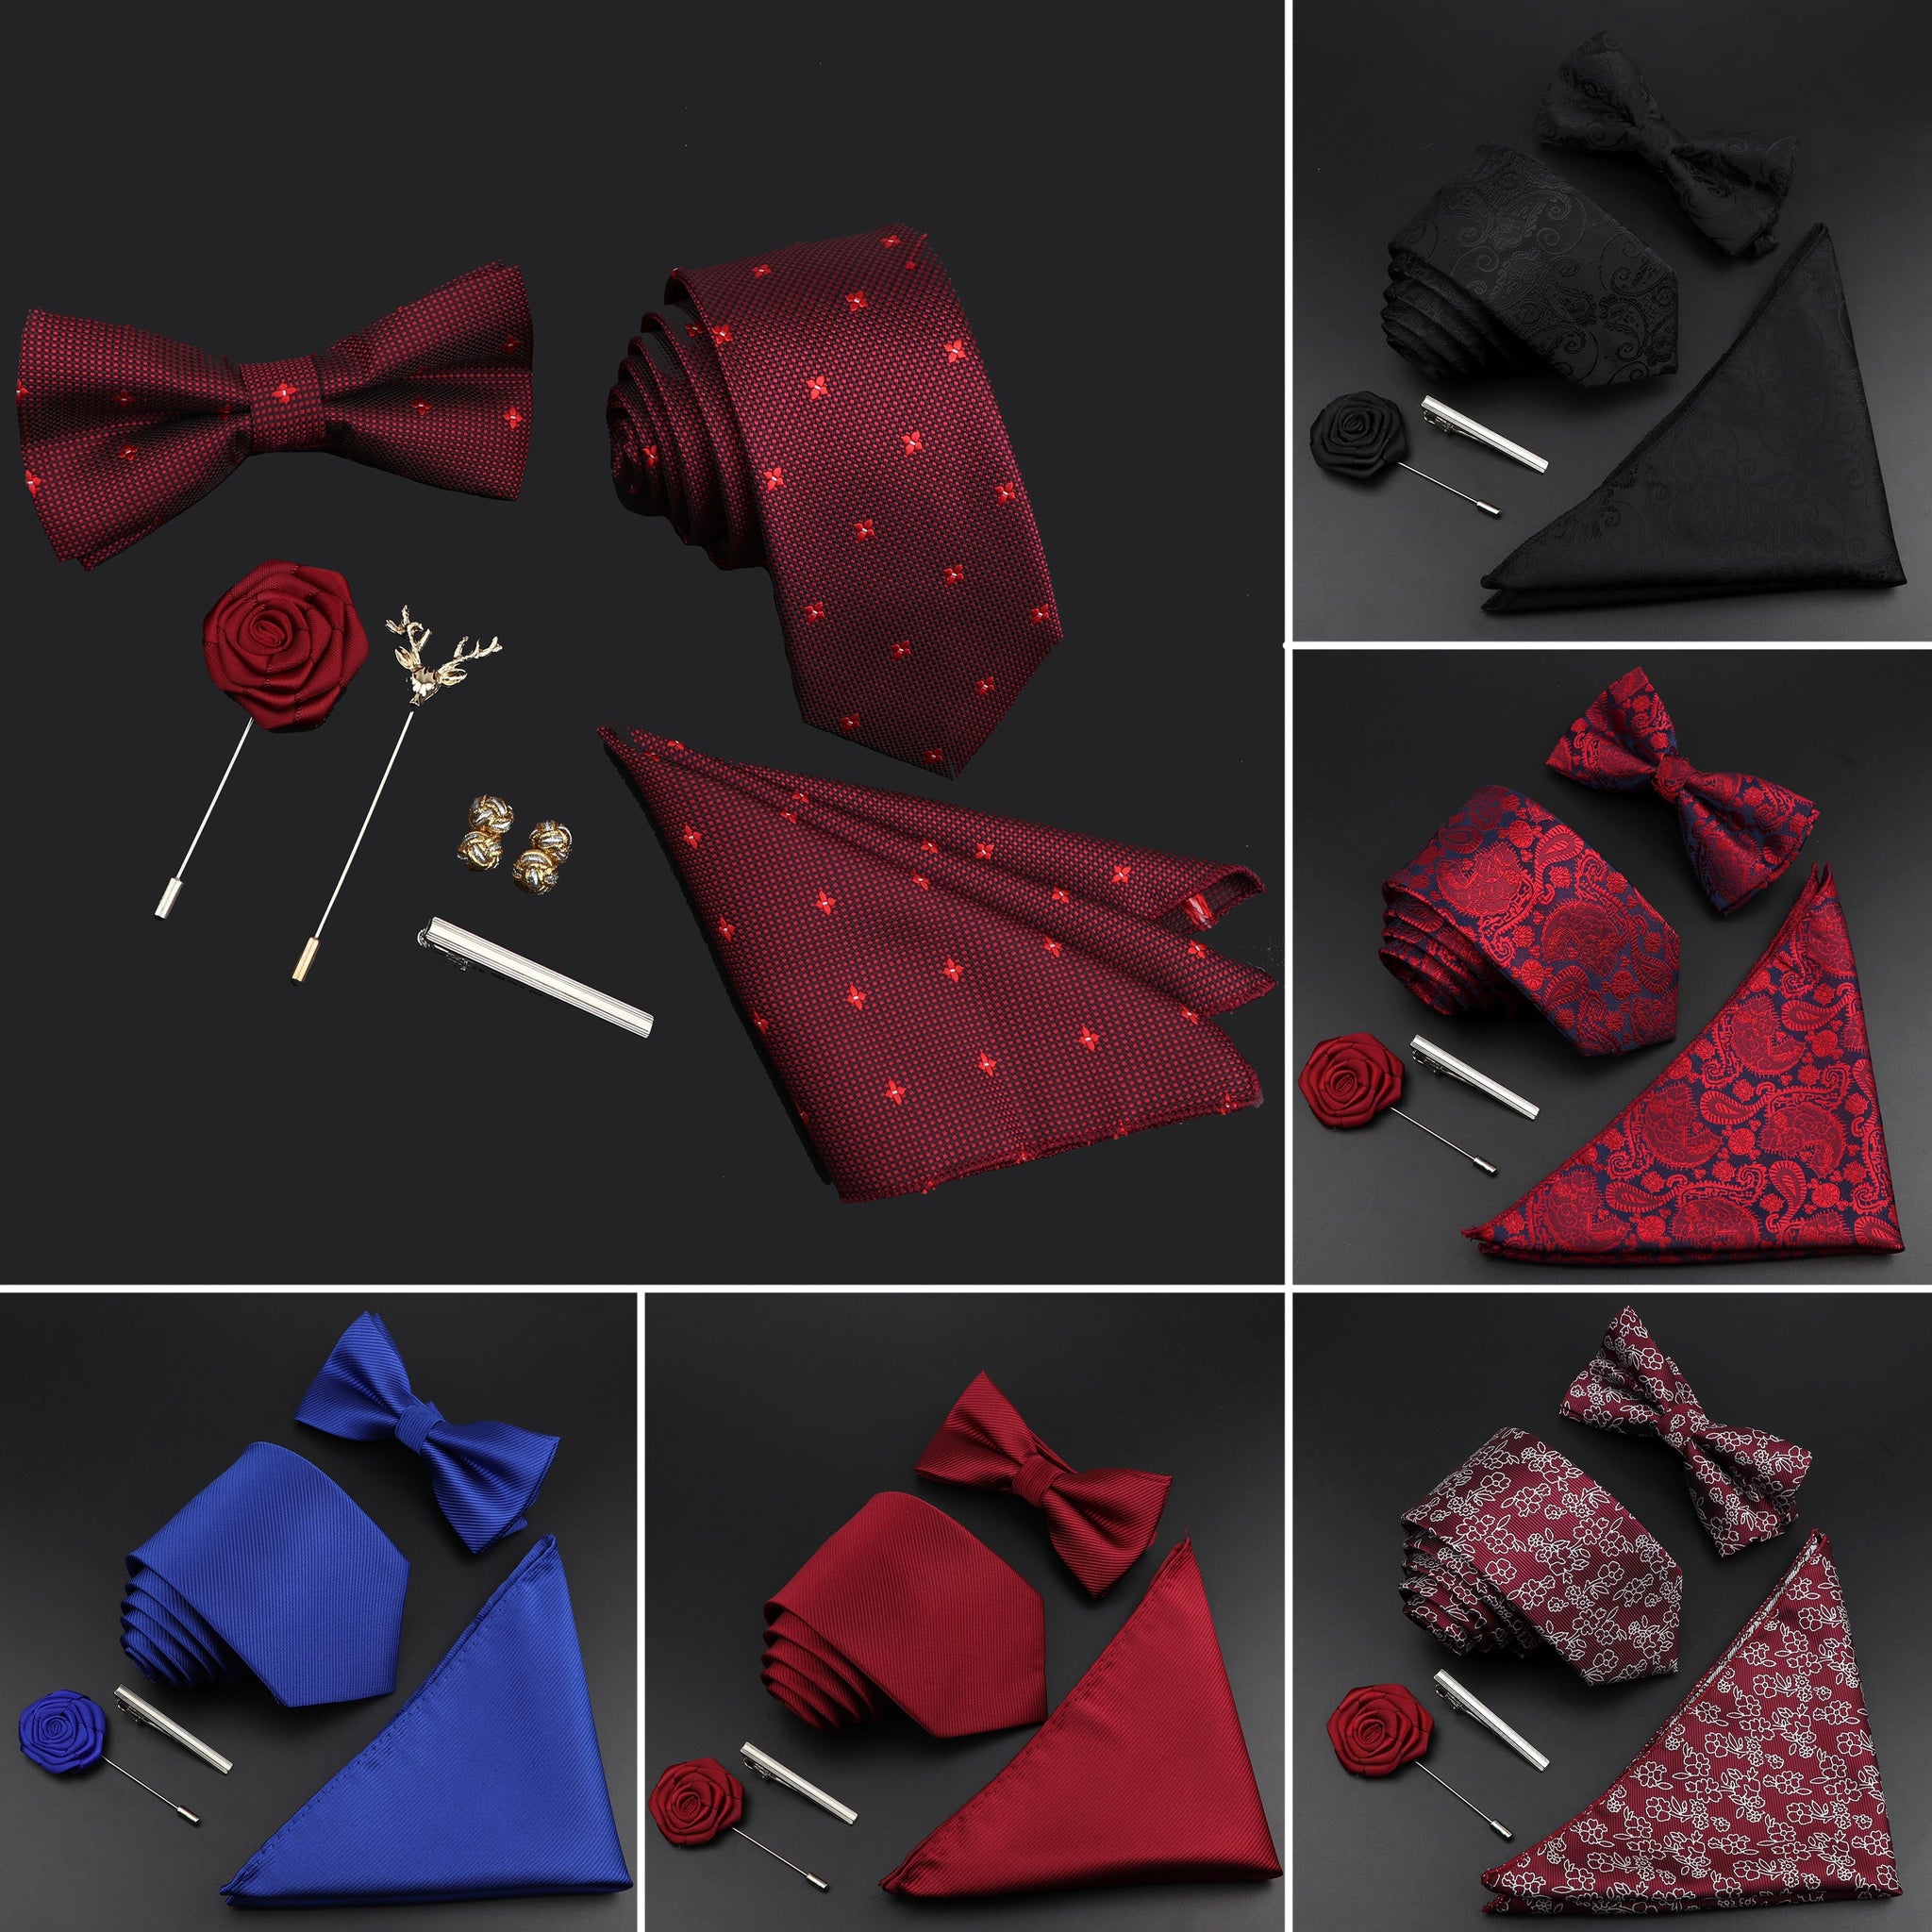 New Solid Color Silk Men Tie Set Polyester Jacquard Woven Necktie Bowtie Suit Vintage Red Blue For Groom Business Wedding Party